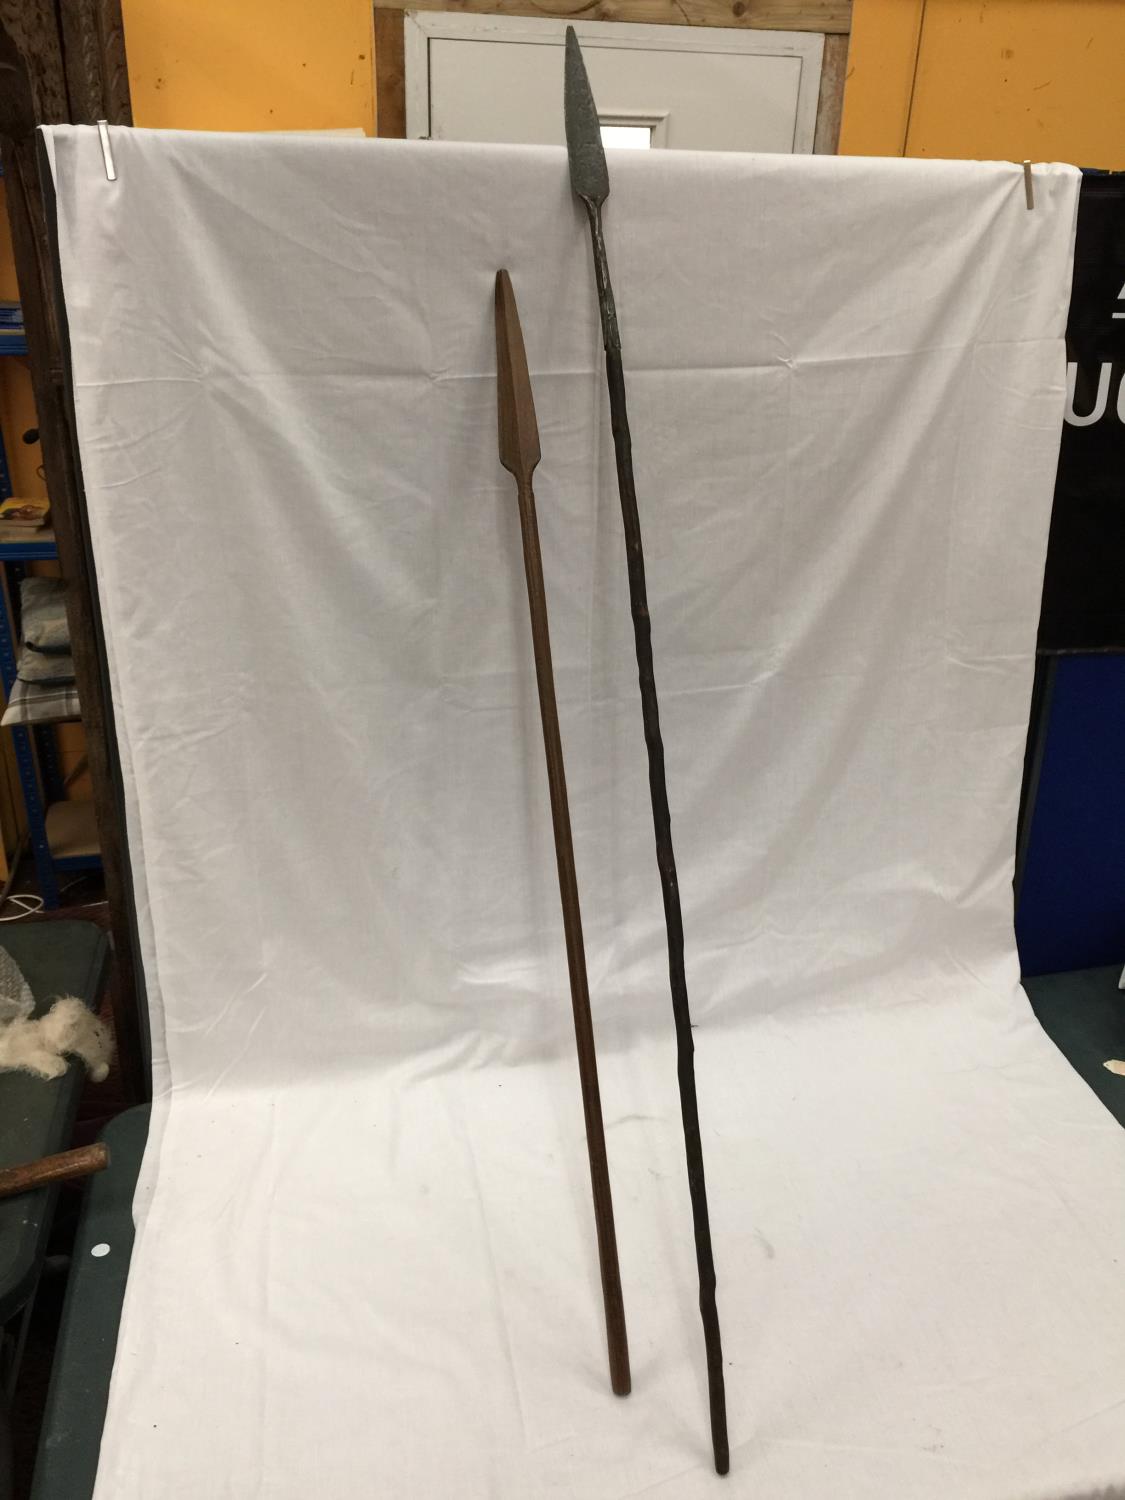 A VINTAGE 'HUNTING' SPEAR WITH METAL TIP LENGTH 150CM AND A WOODEN SPEAR LENGTH 118CM